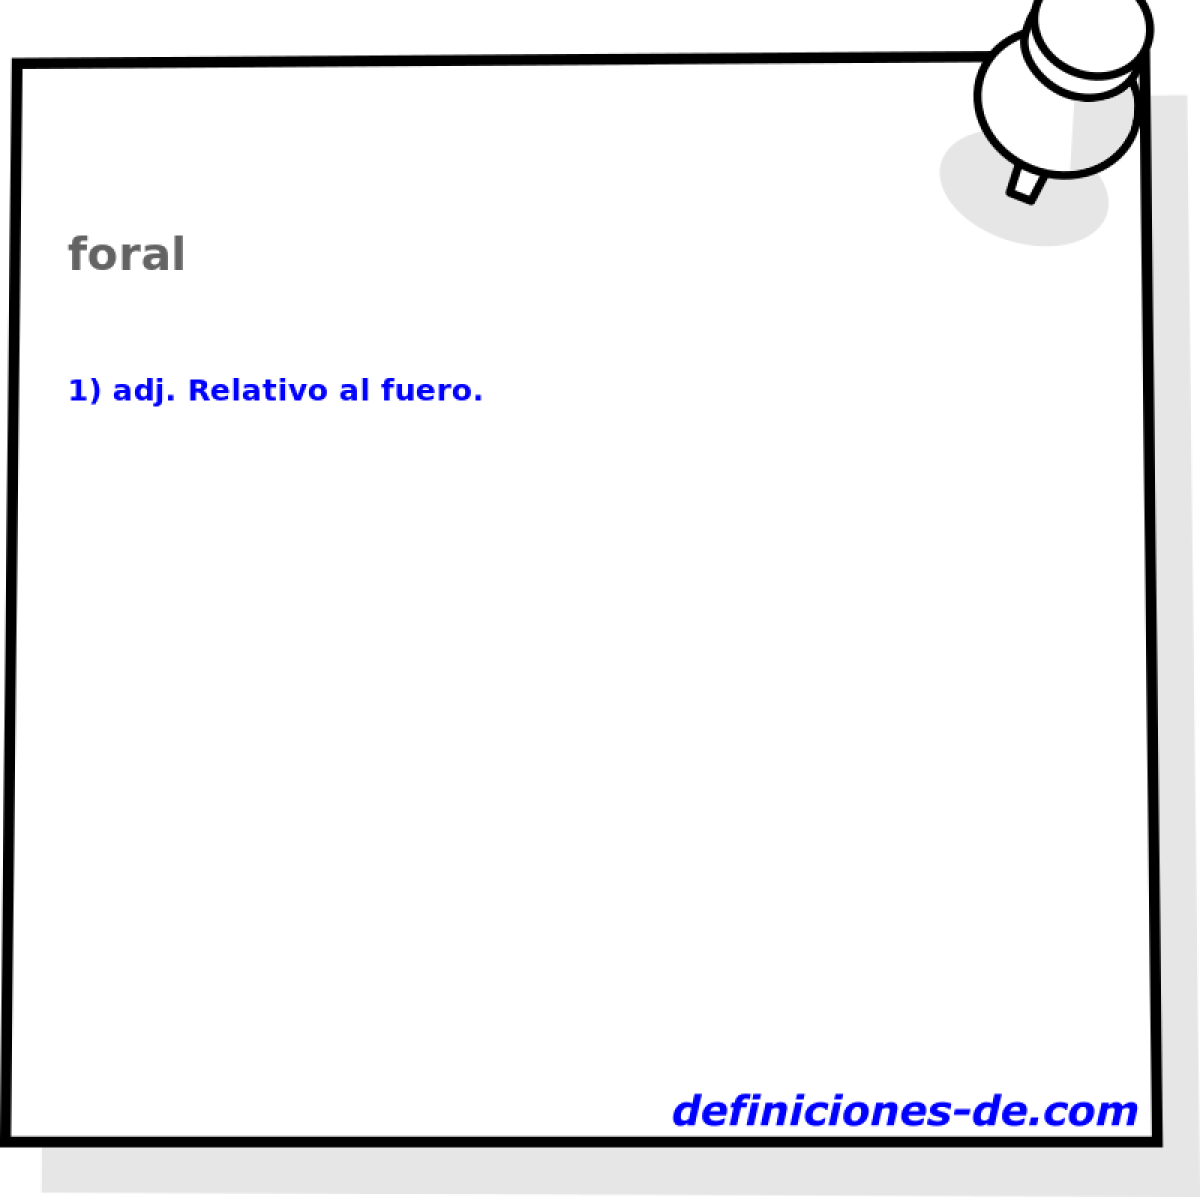 foral 